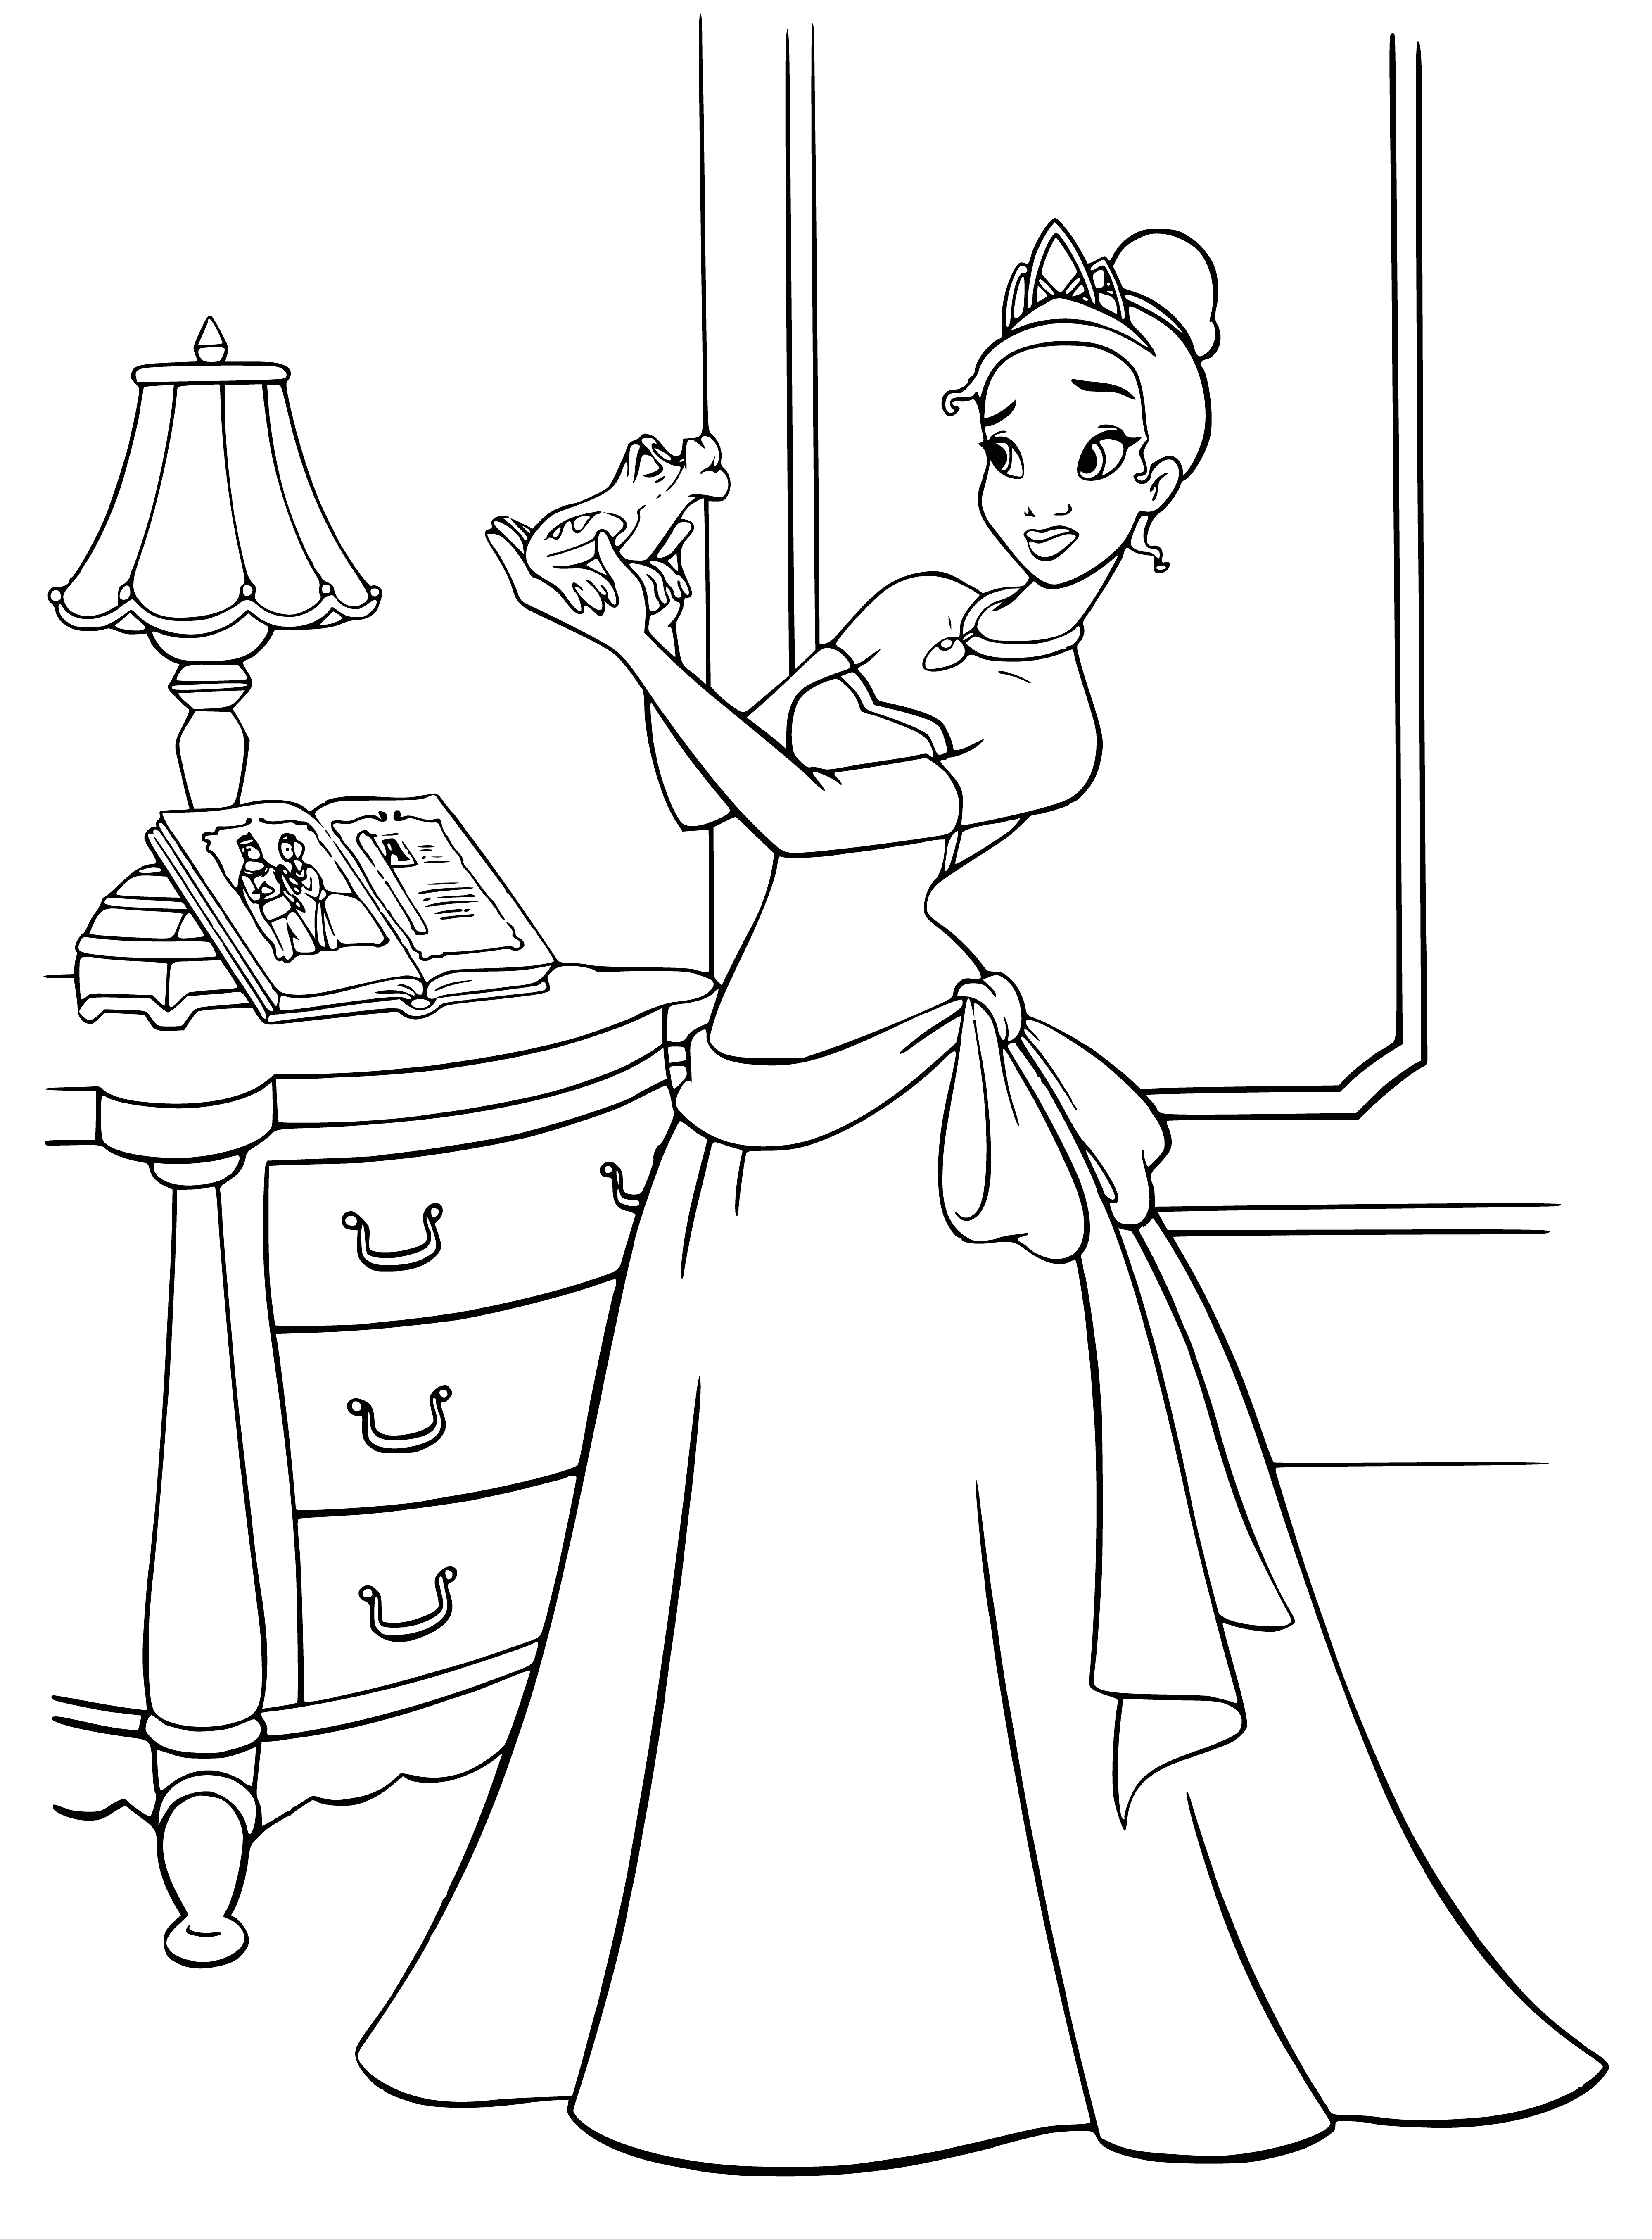 Tiana and the Frog Prince coloring page